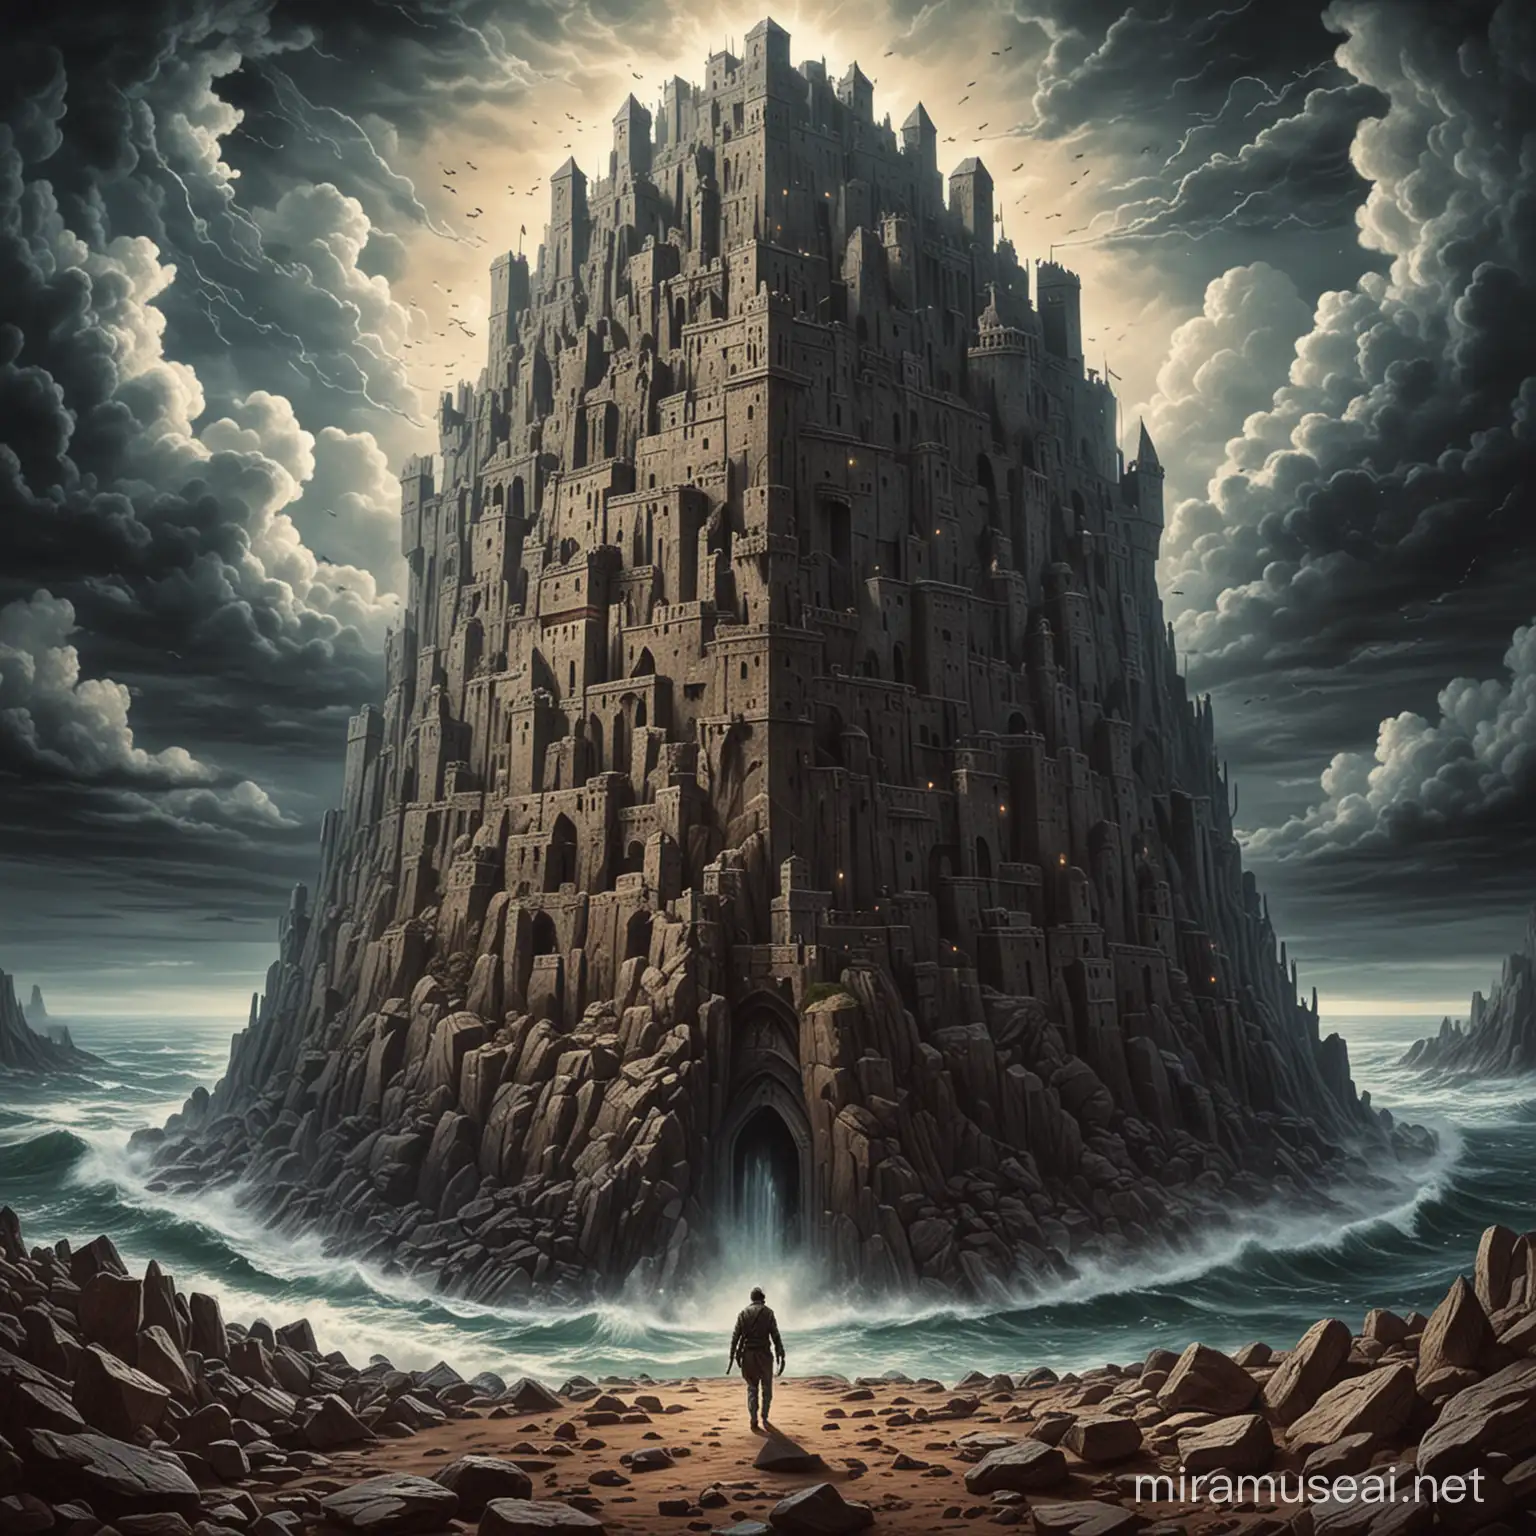 Majestic Fortress of the Mind A Digital Art Depiction